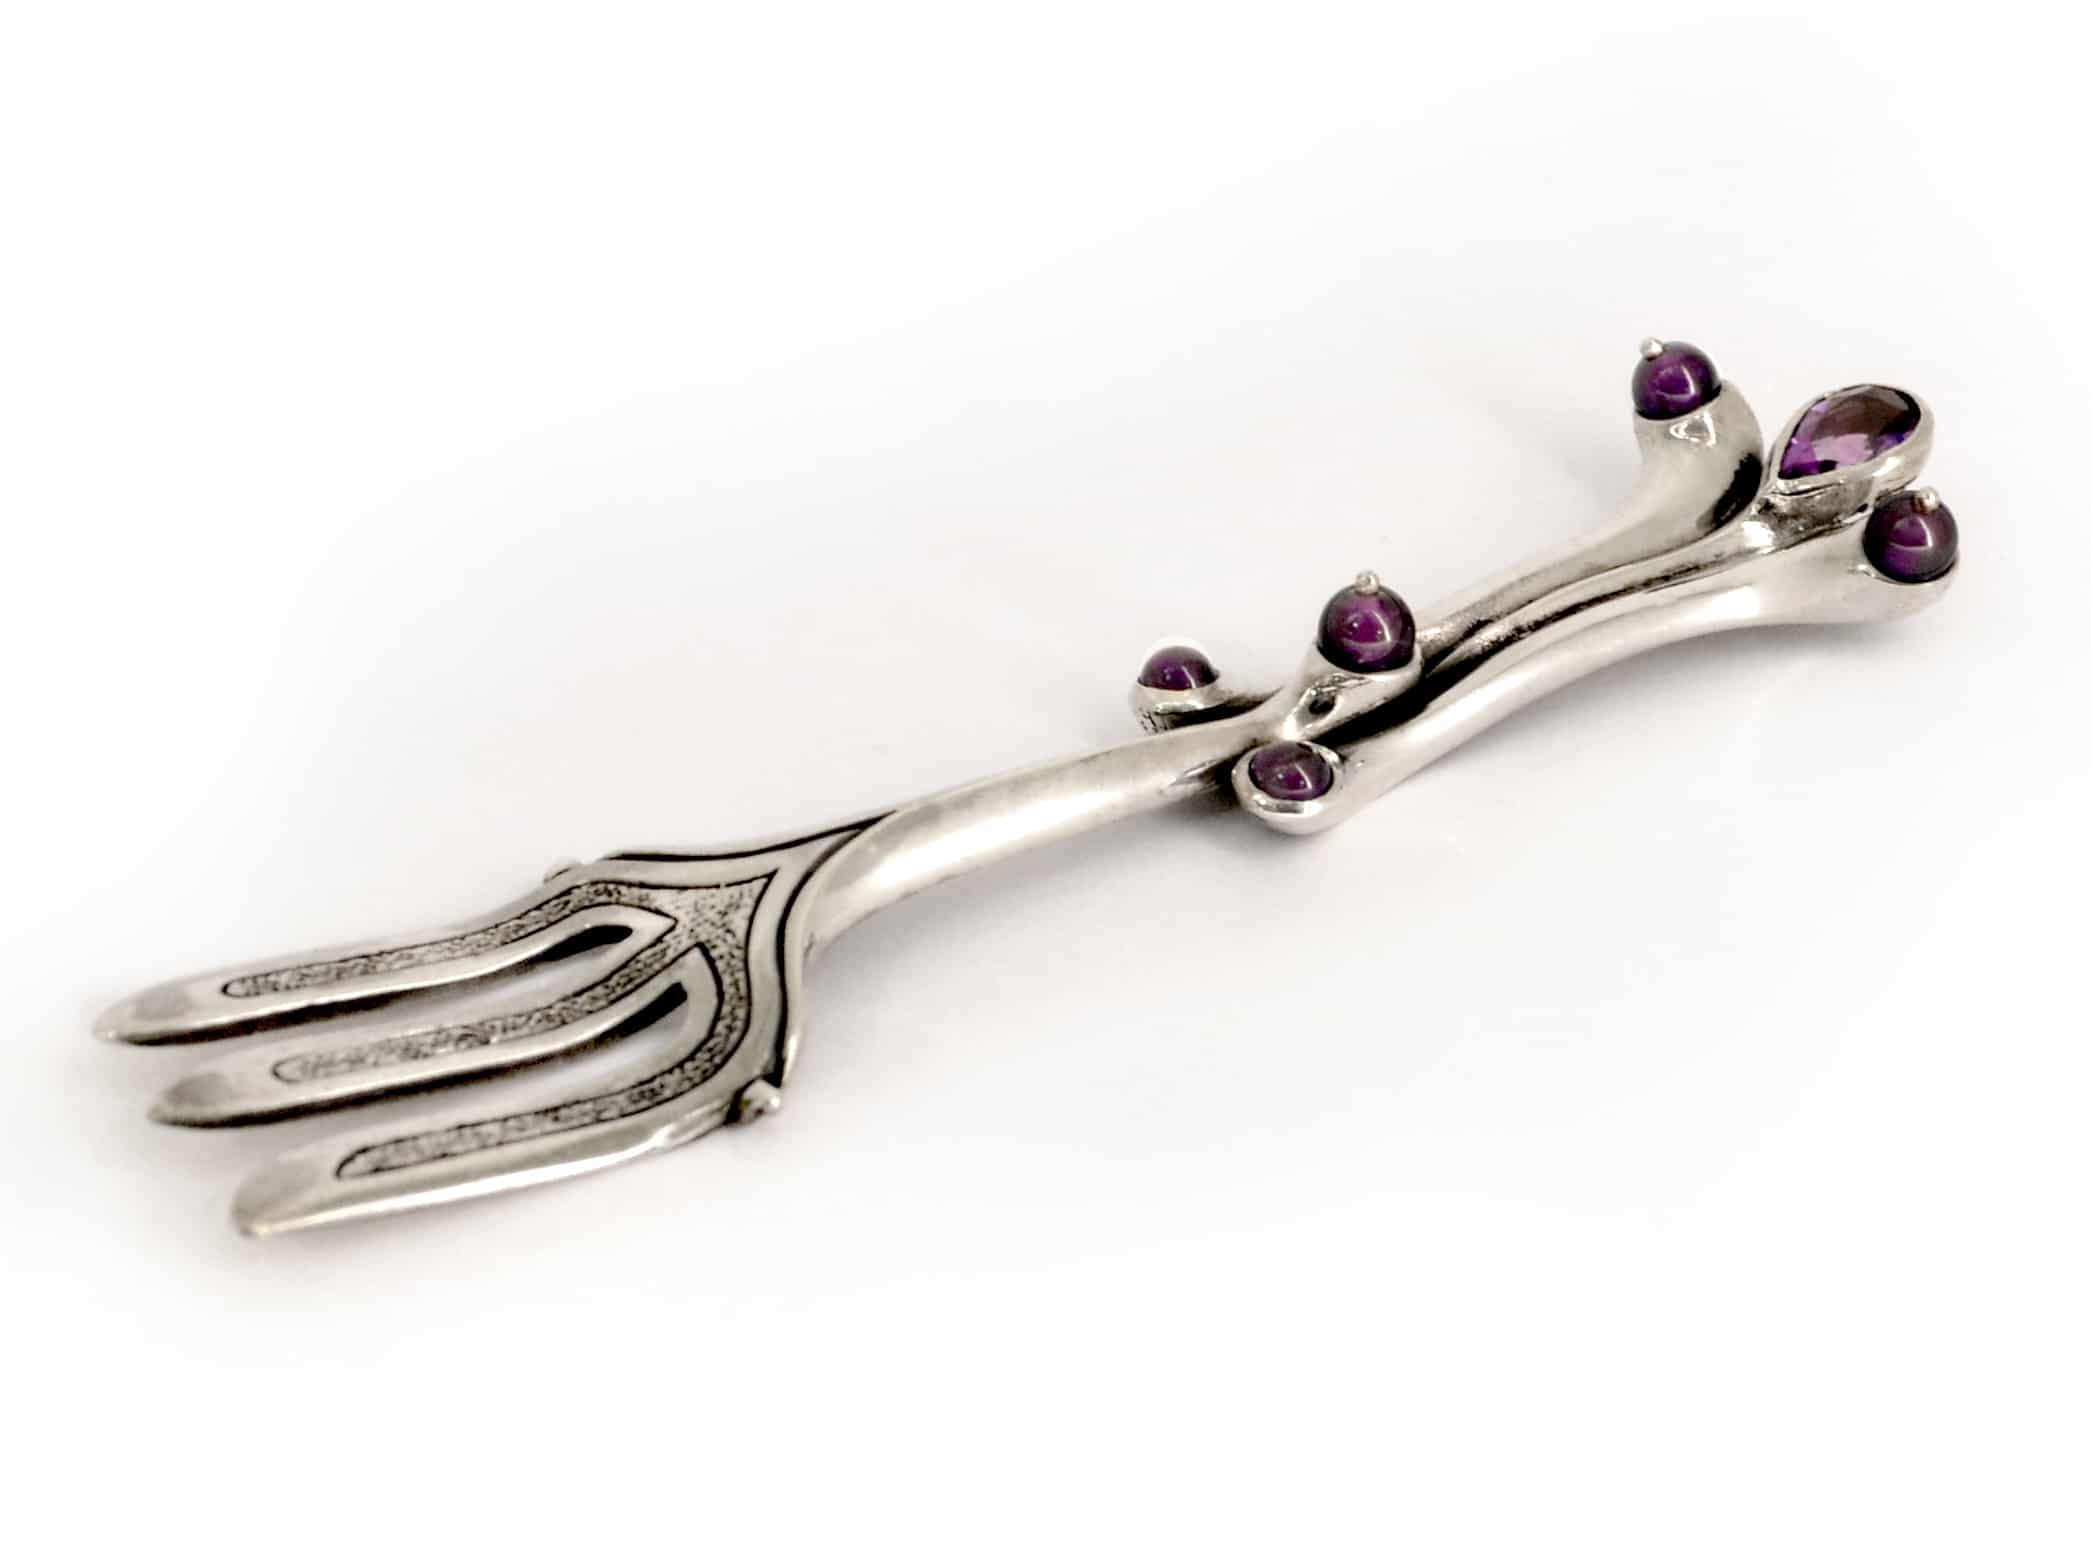 Unique Small Fork with Natural Amethyst Stones